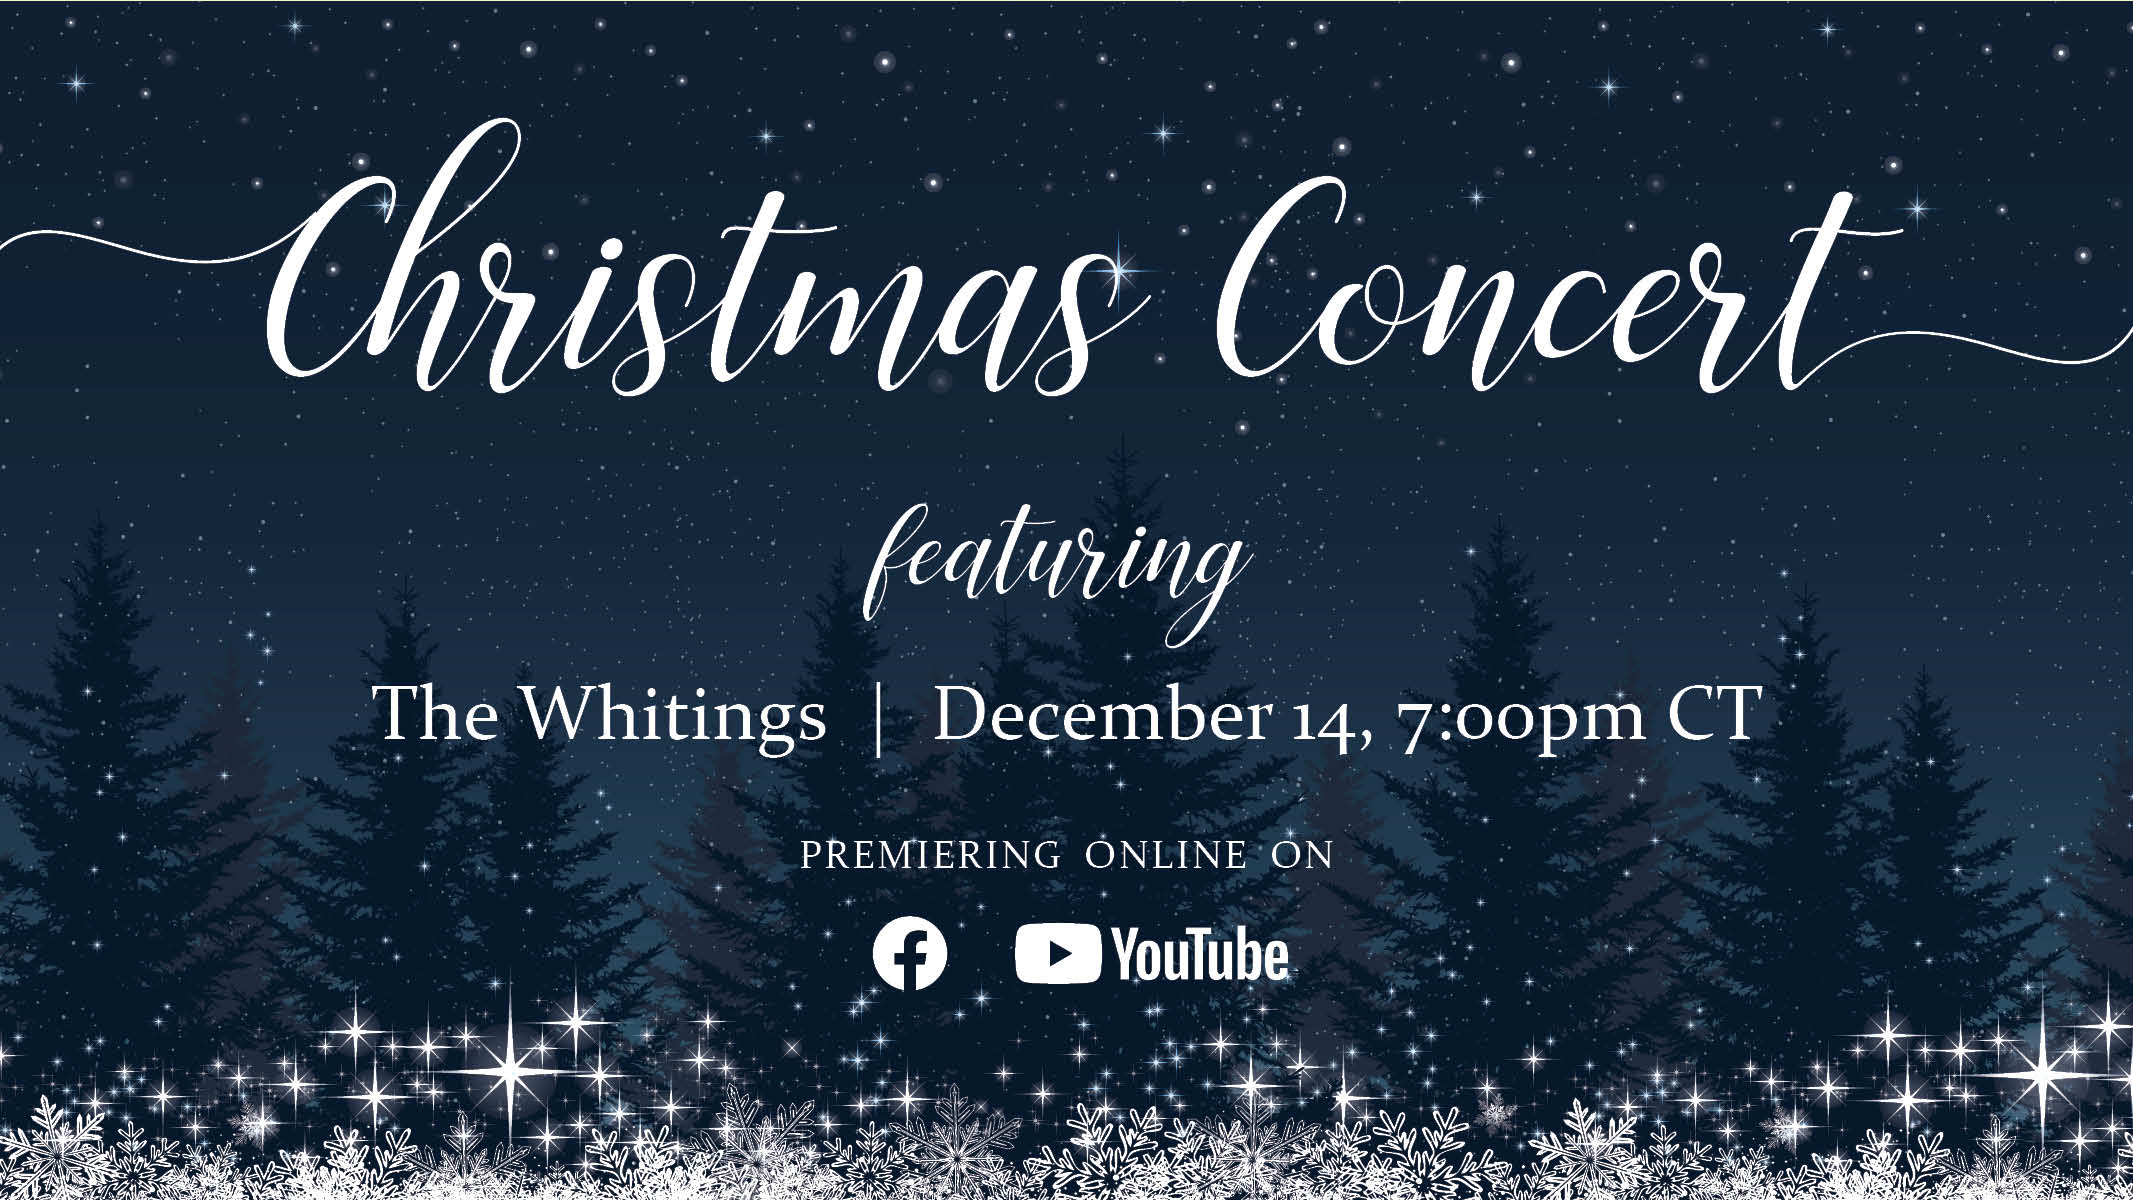 Christmas Concert with The Whitings